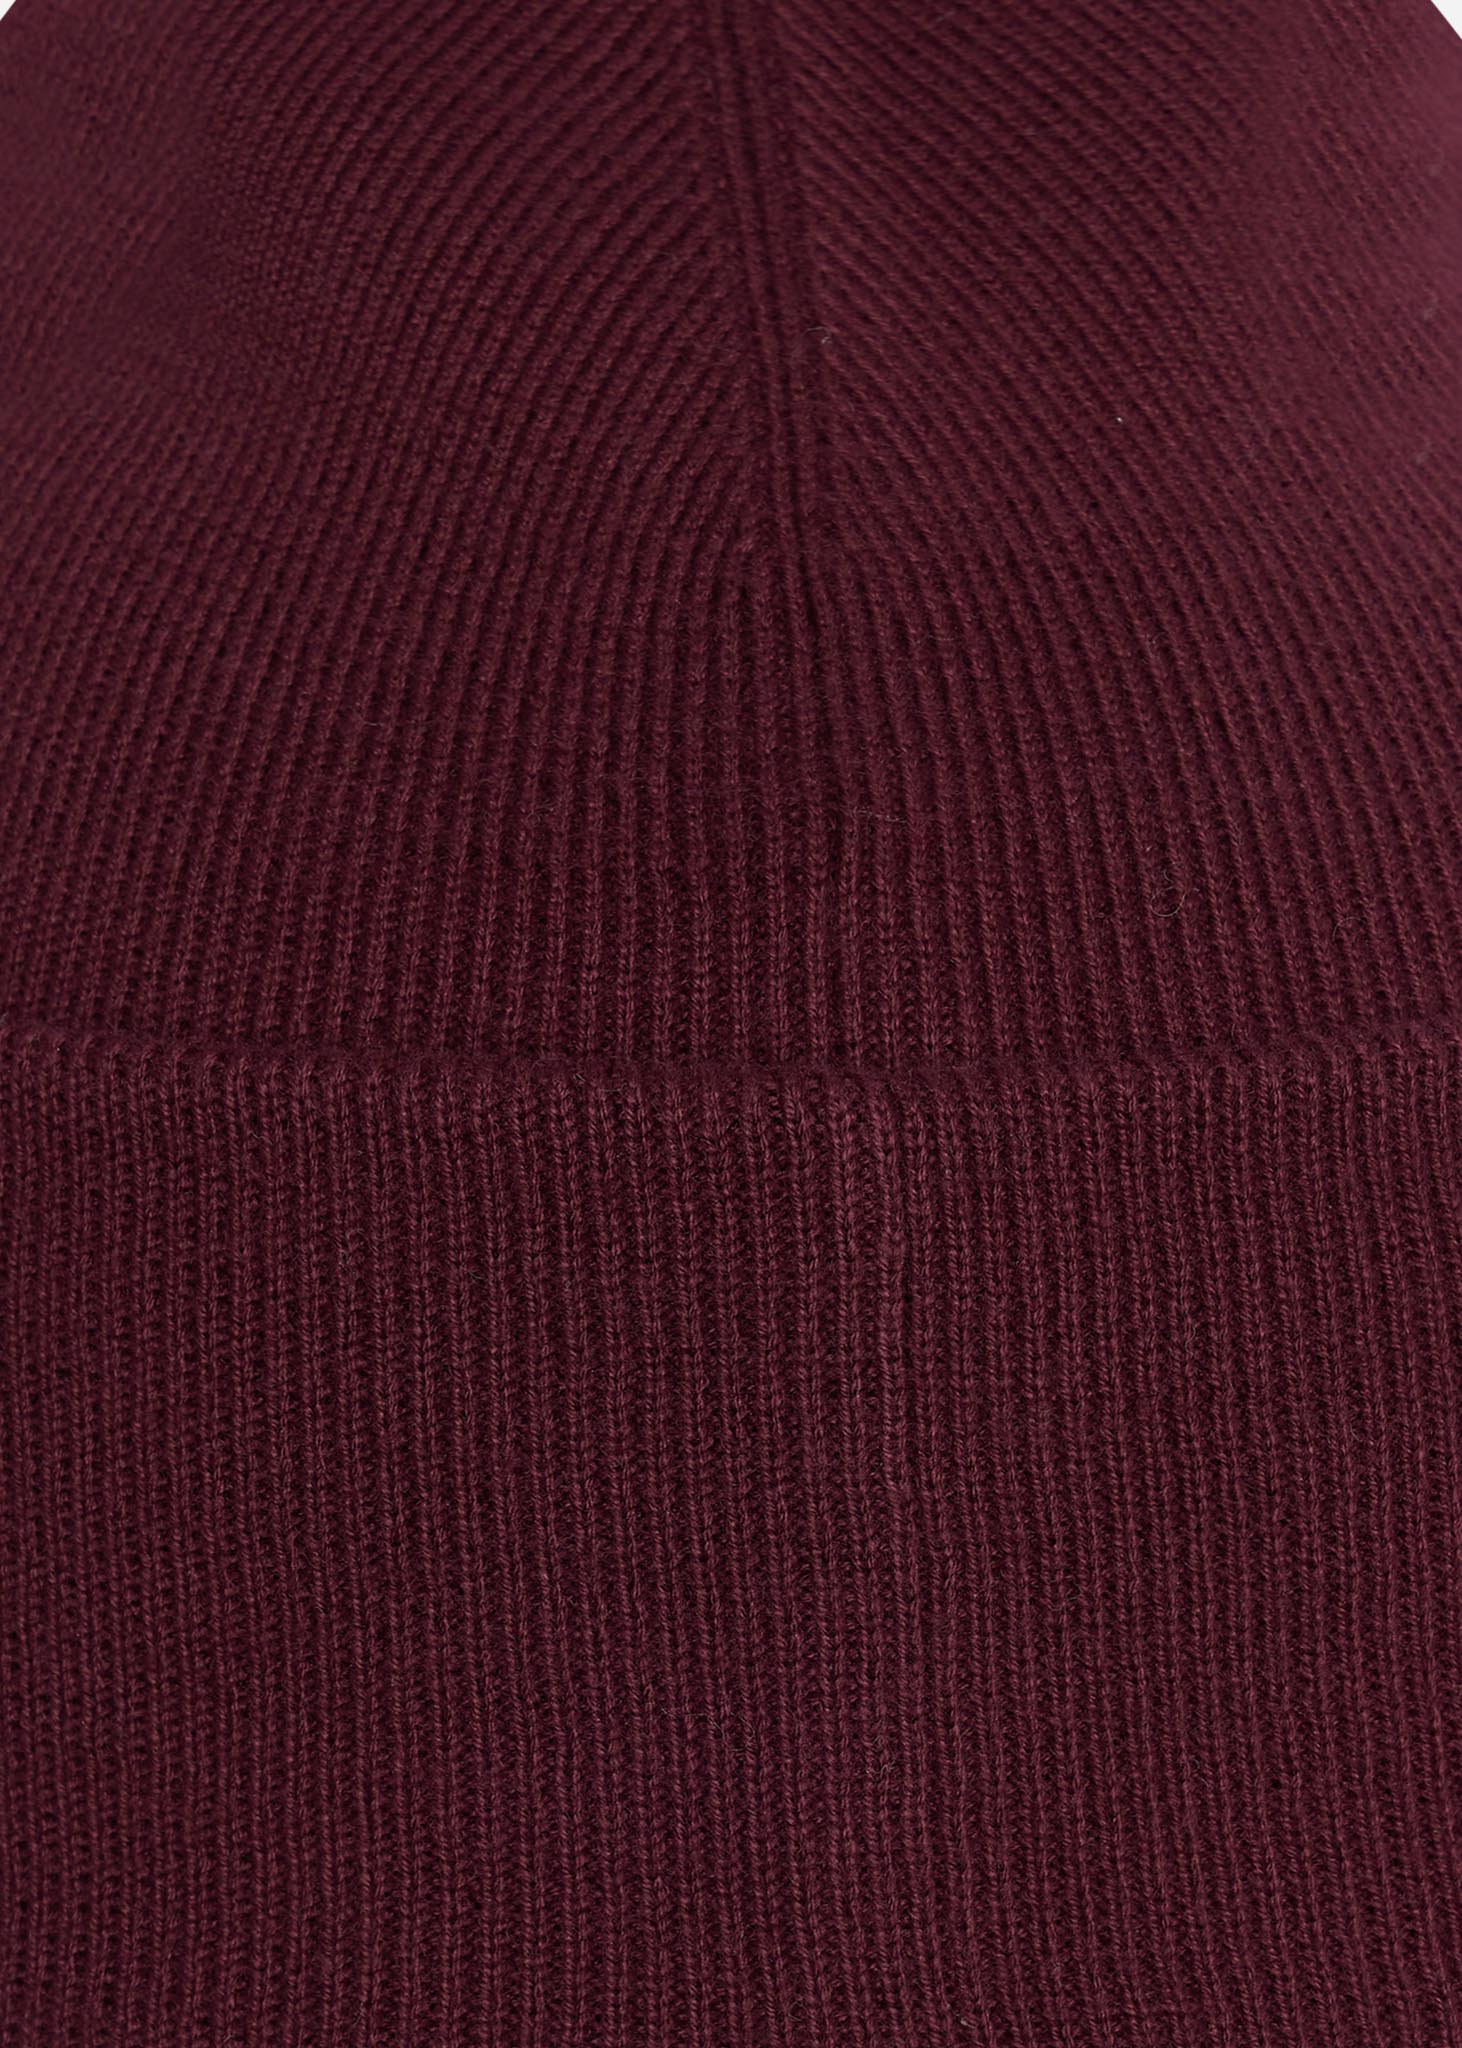 fred perry muts oxblood red 